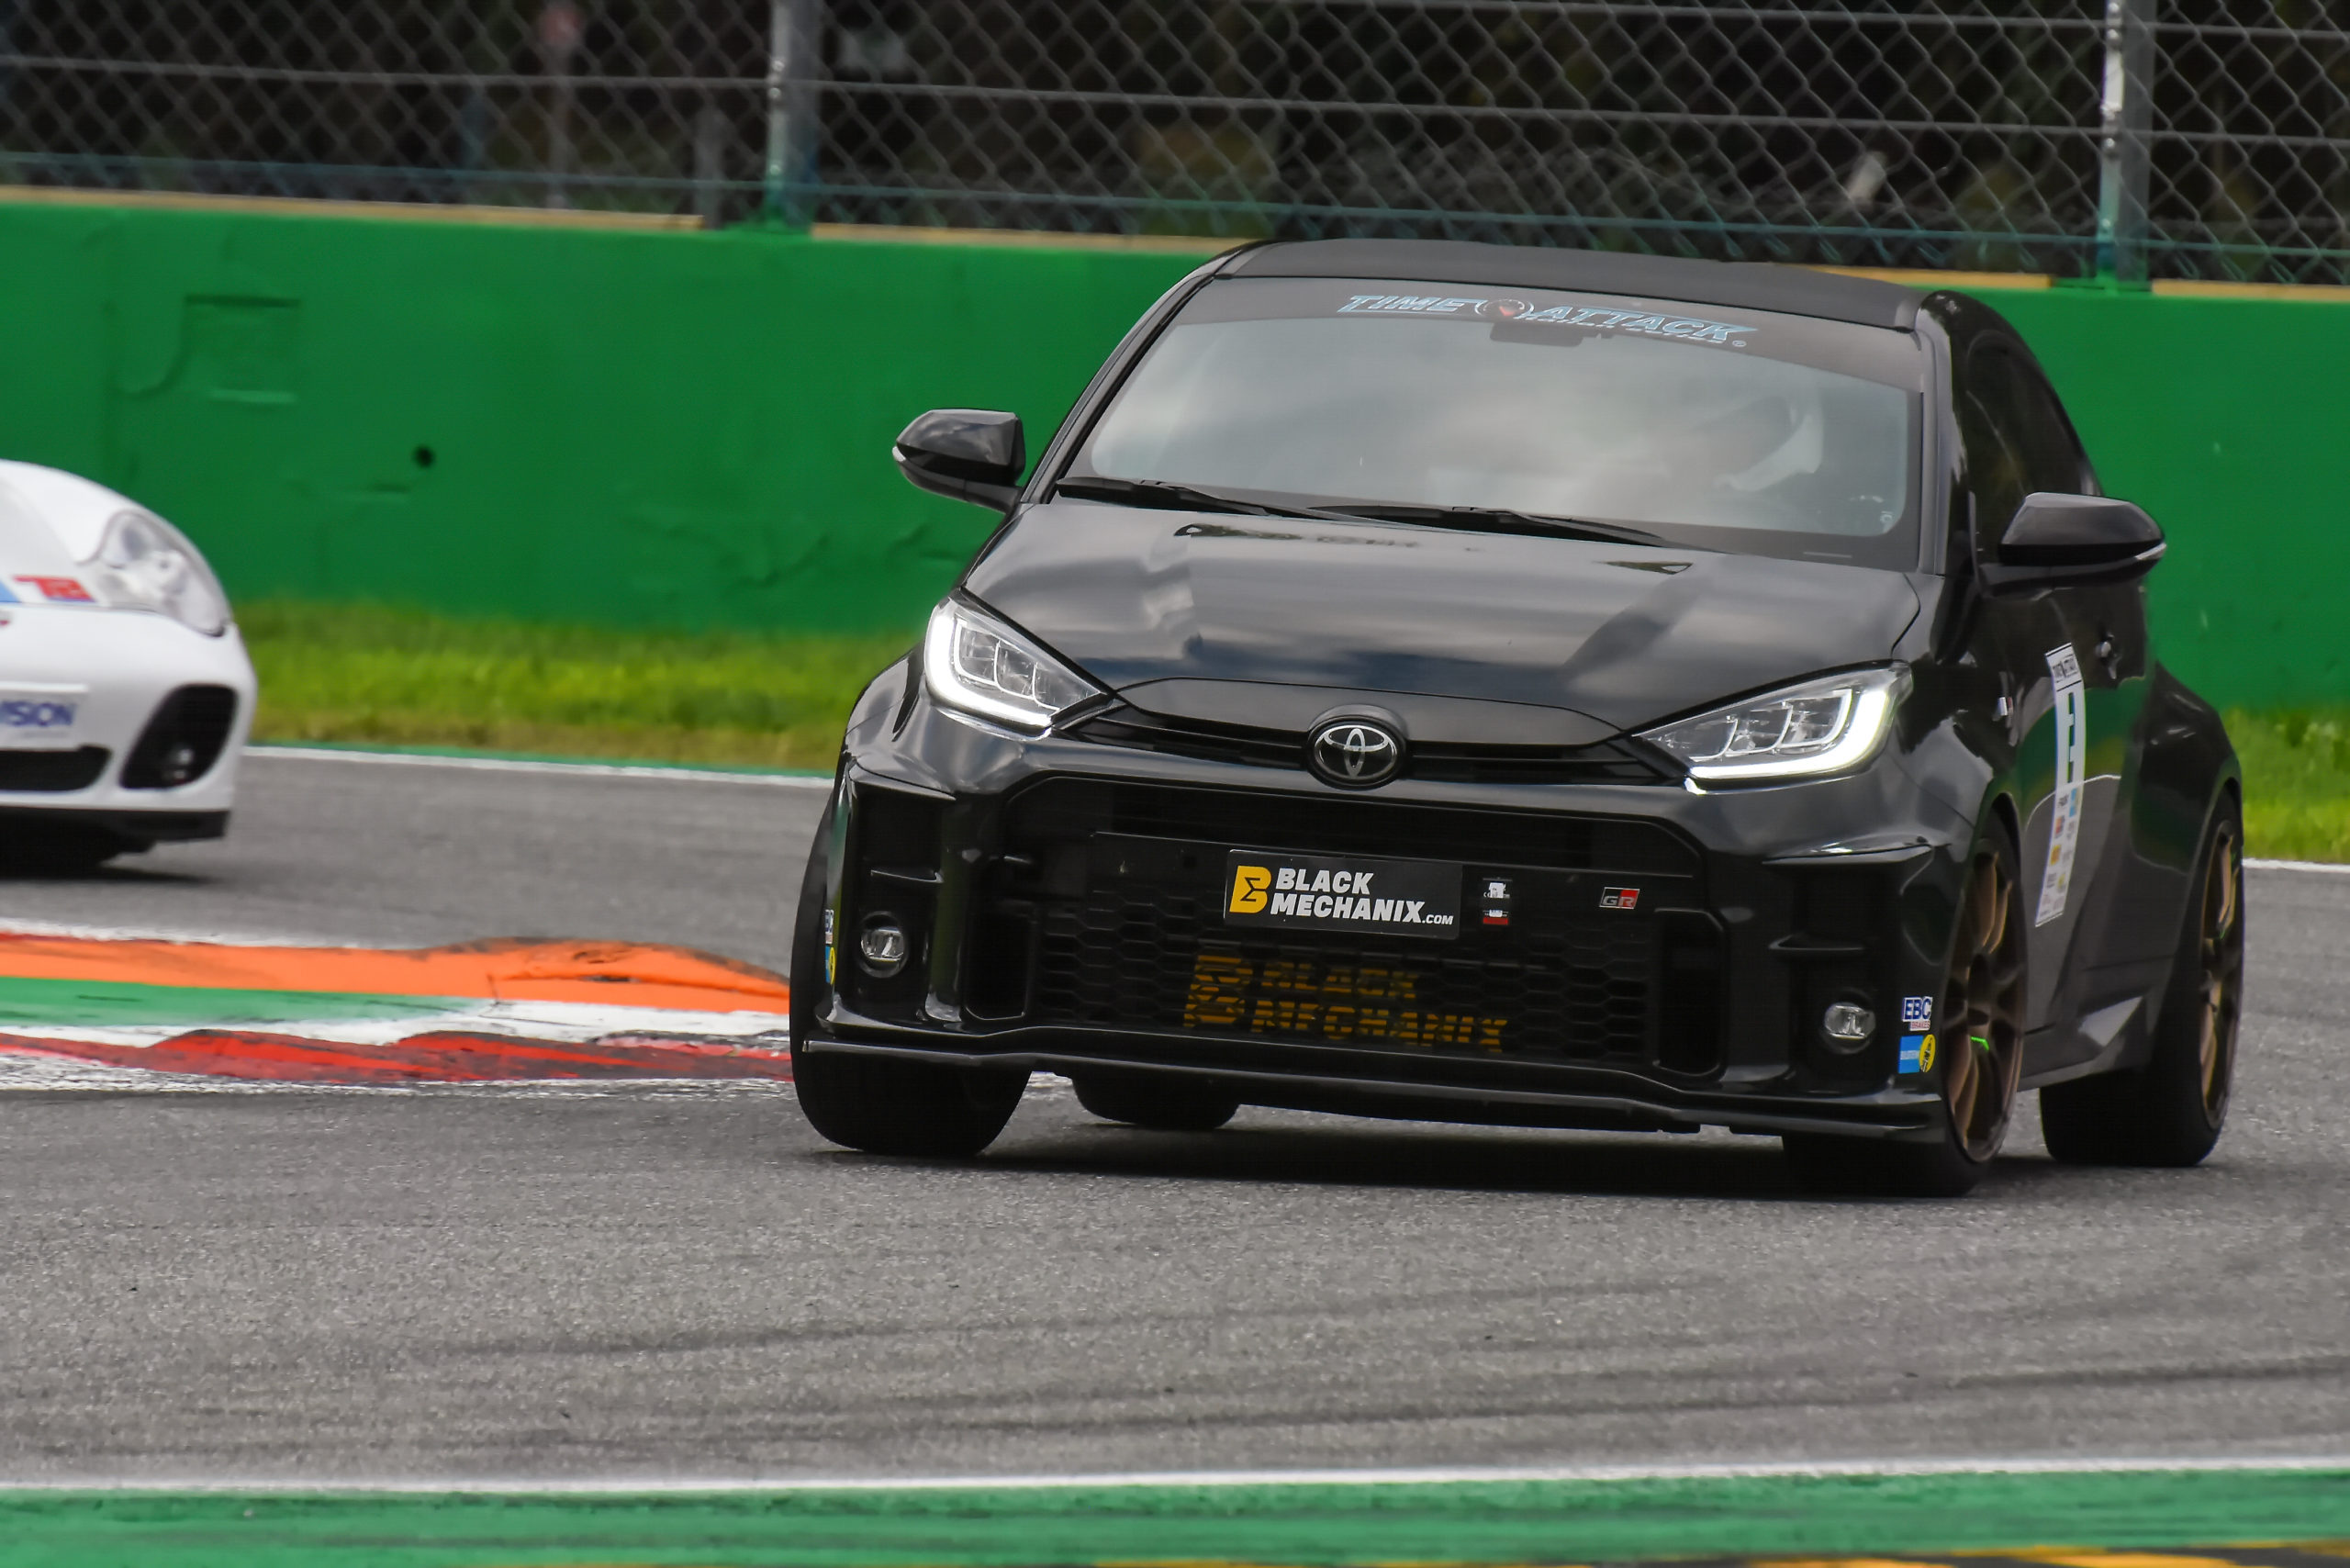 RP-X Equipped GR Yaris Becomes Fastest Around Monza Circuit